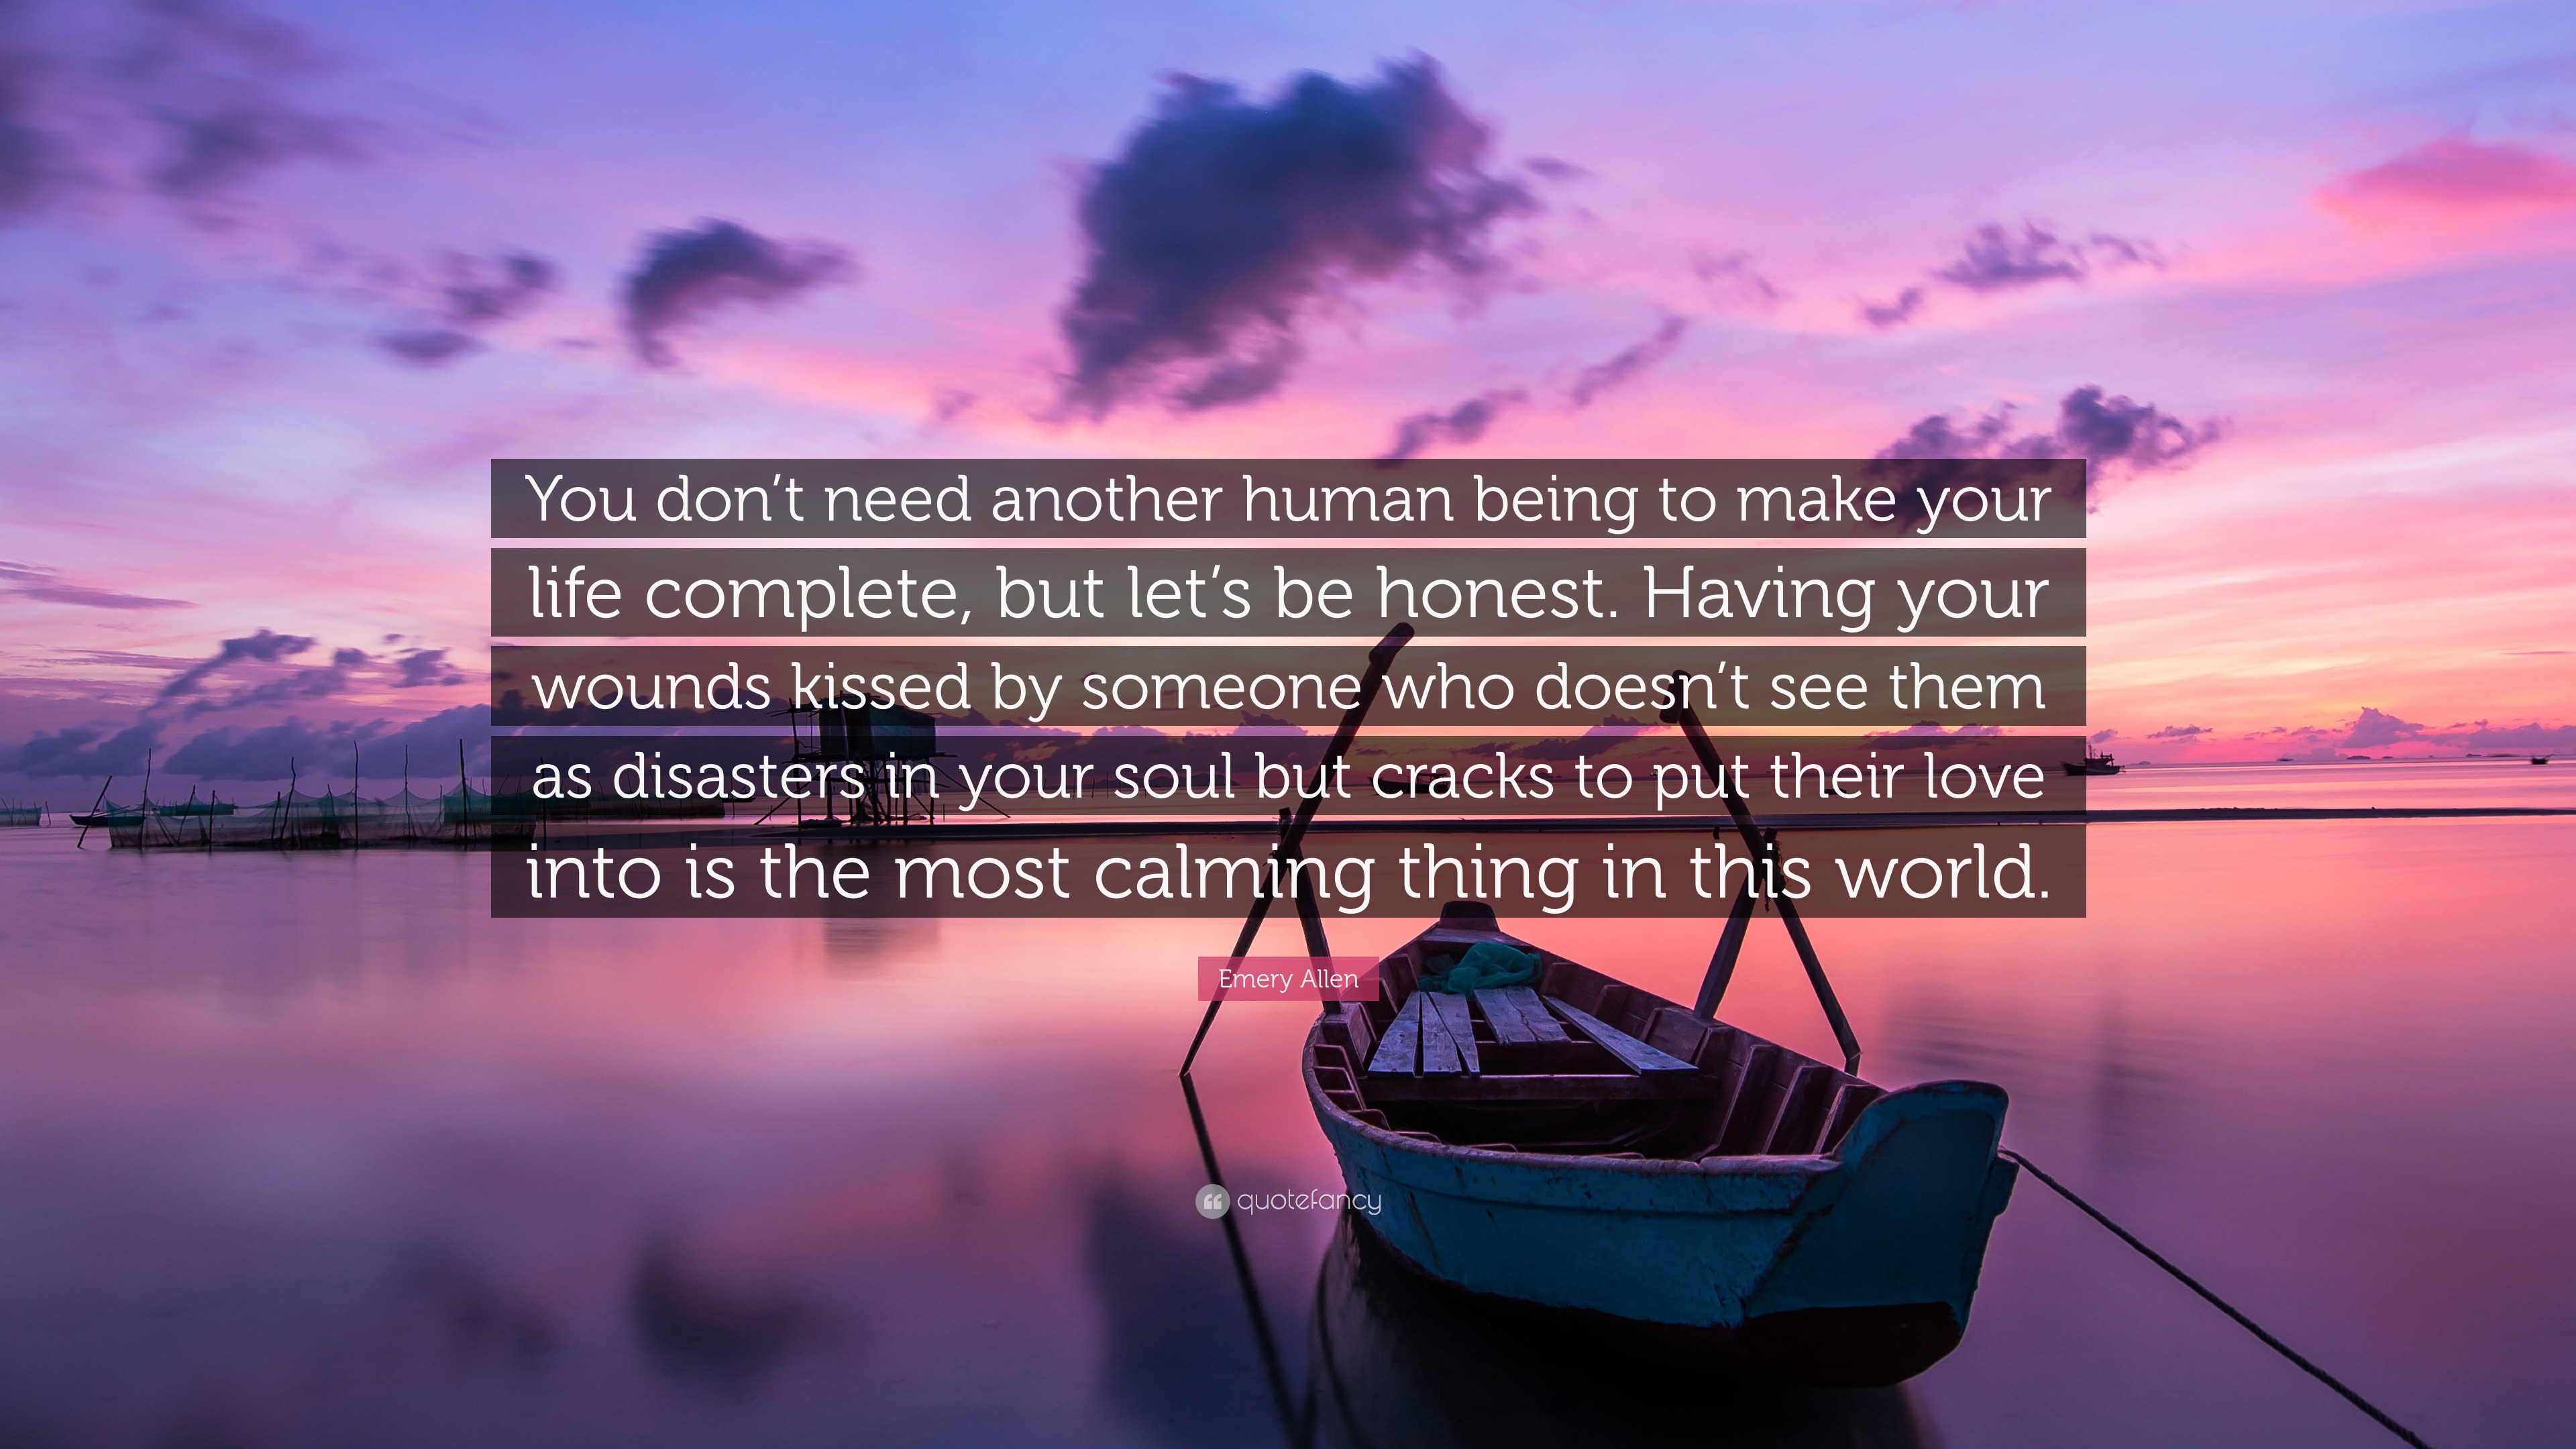 Emery Allen Quote: “You don’t need another human being to make your